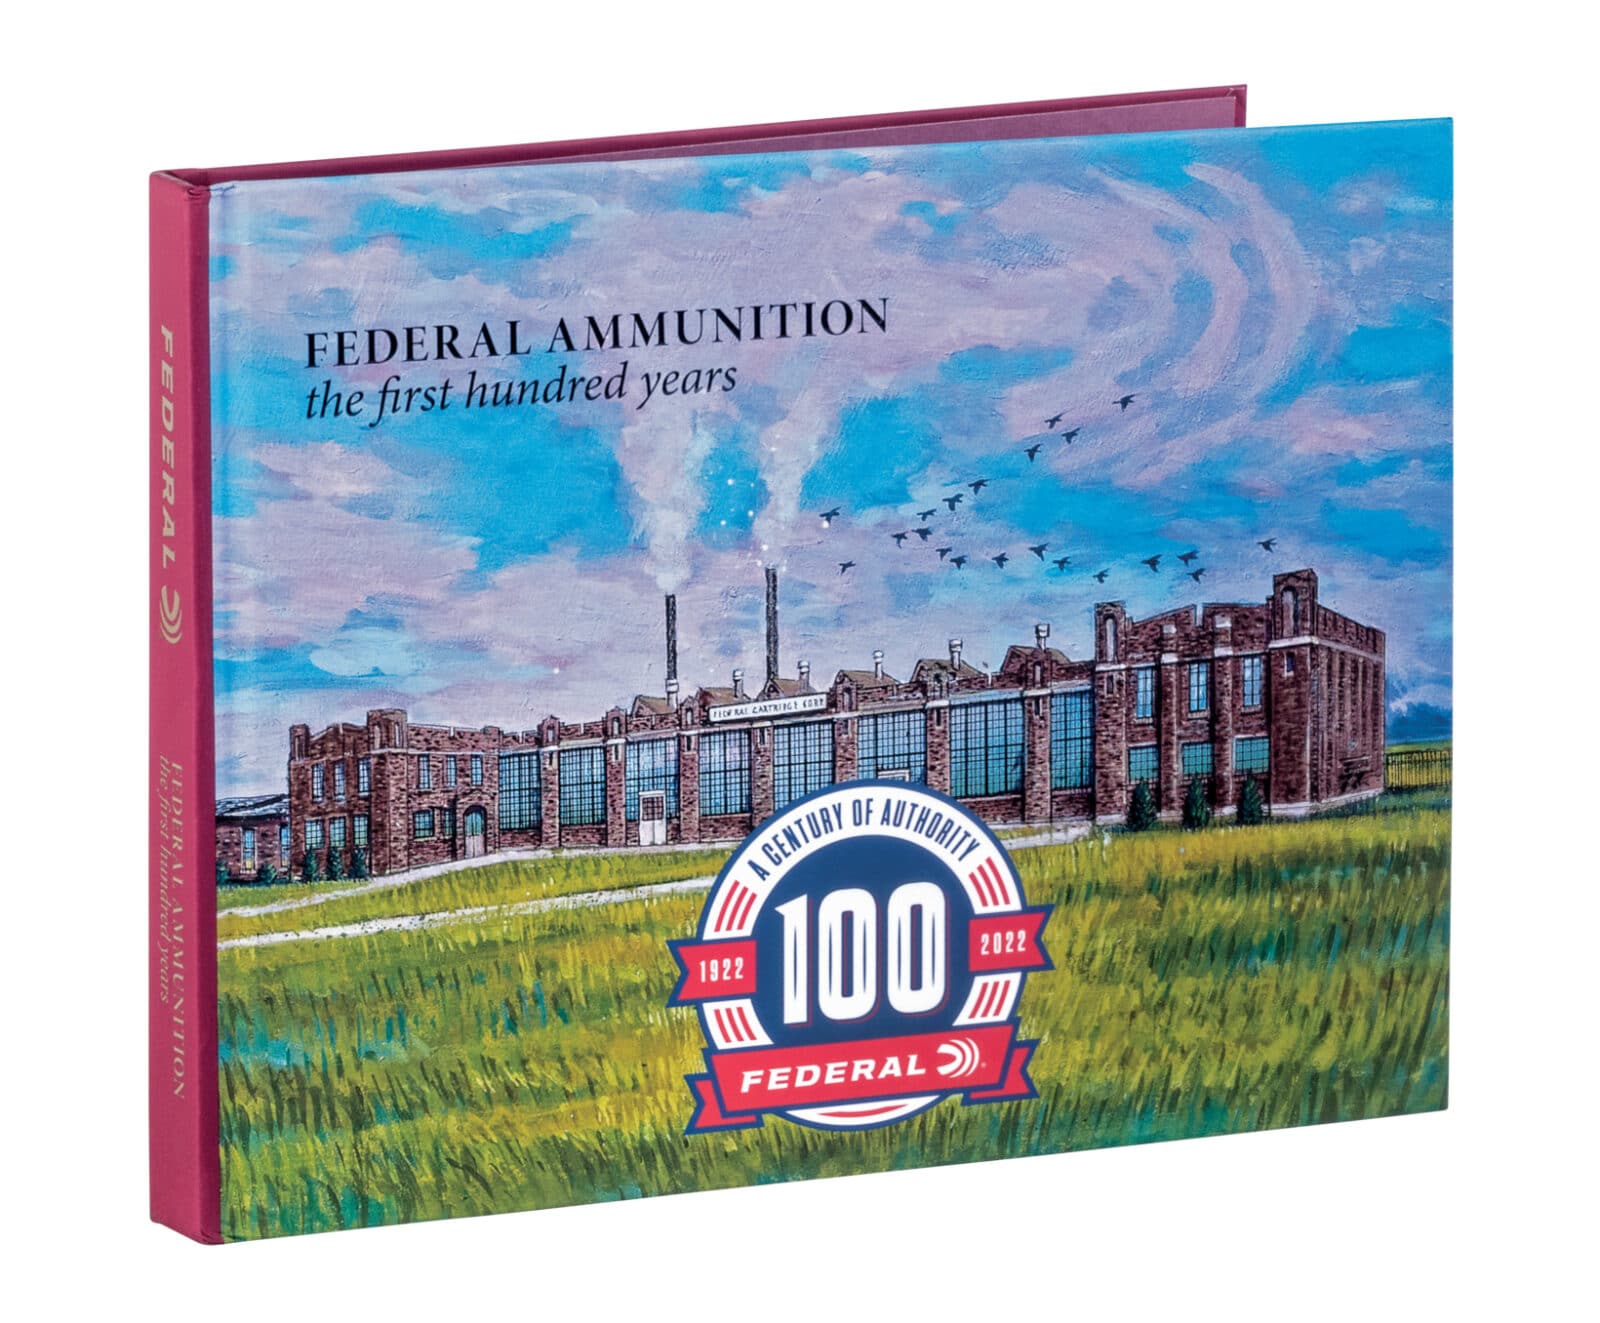 "Federal Ammunition: The First 100 Years" coffee table book